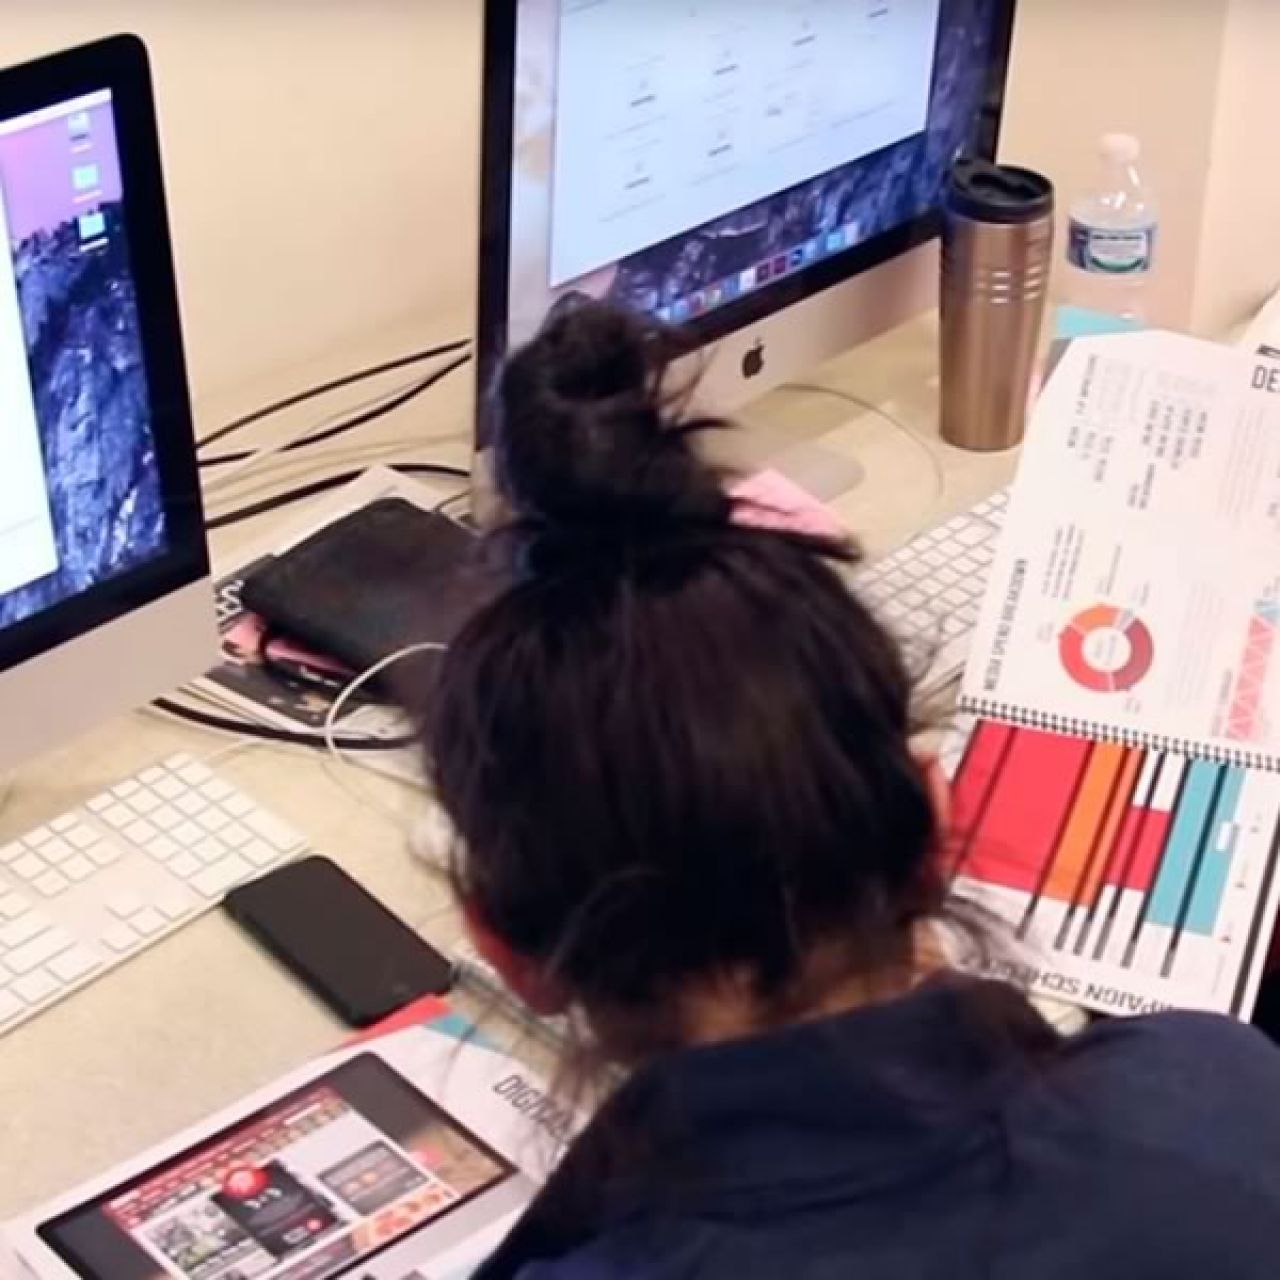 A female advertising student sits in front of a computer working on a presentation. We see her dark brown pulled up in a pony tail and some printed report pages in front of her with graphs and creative screenshots.